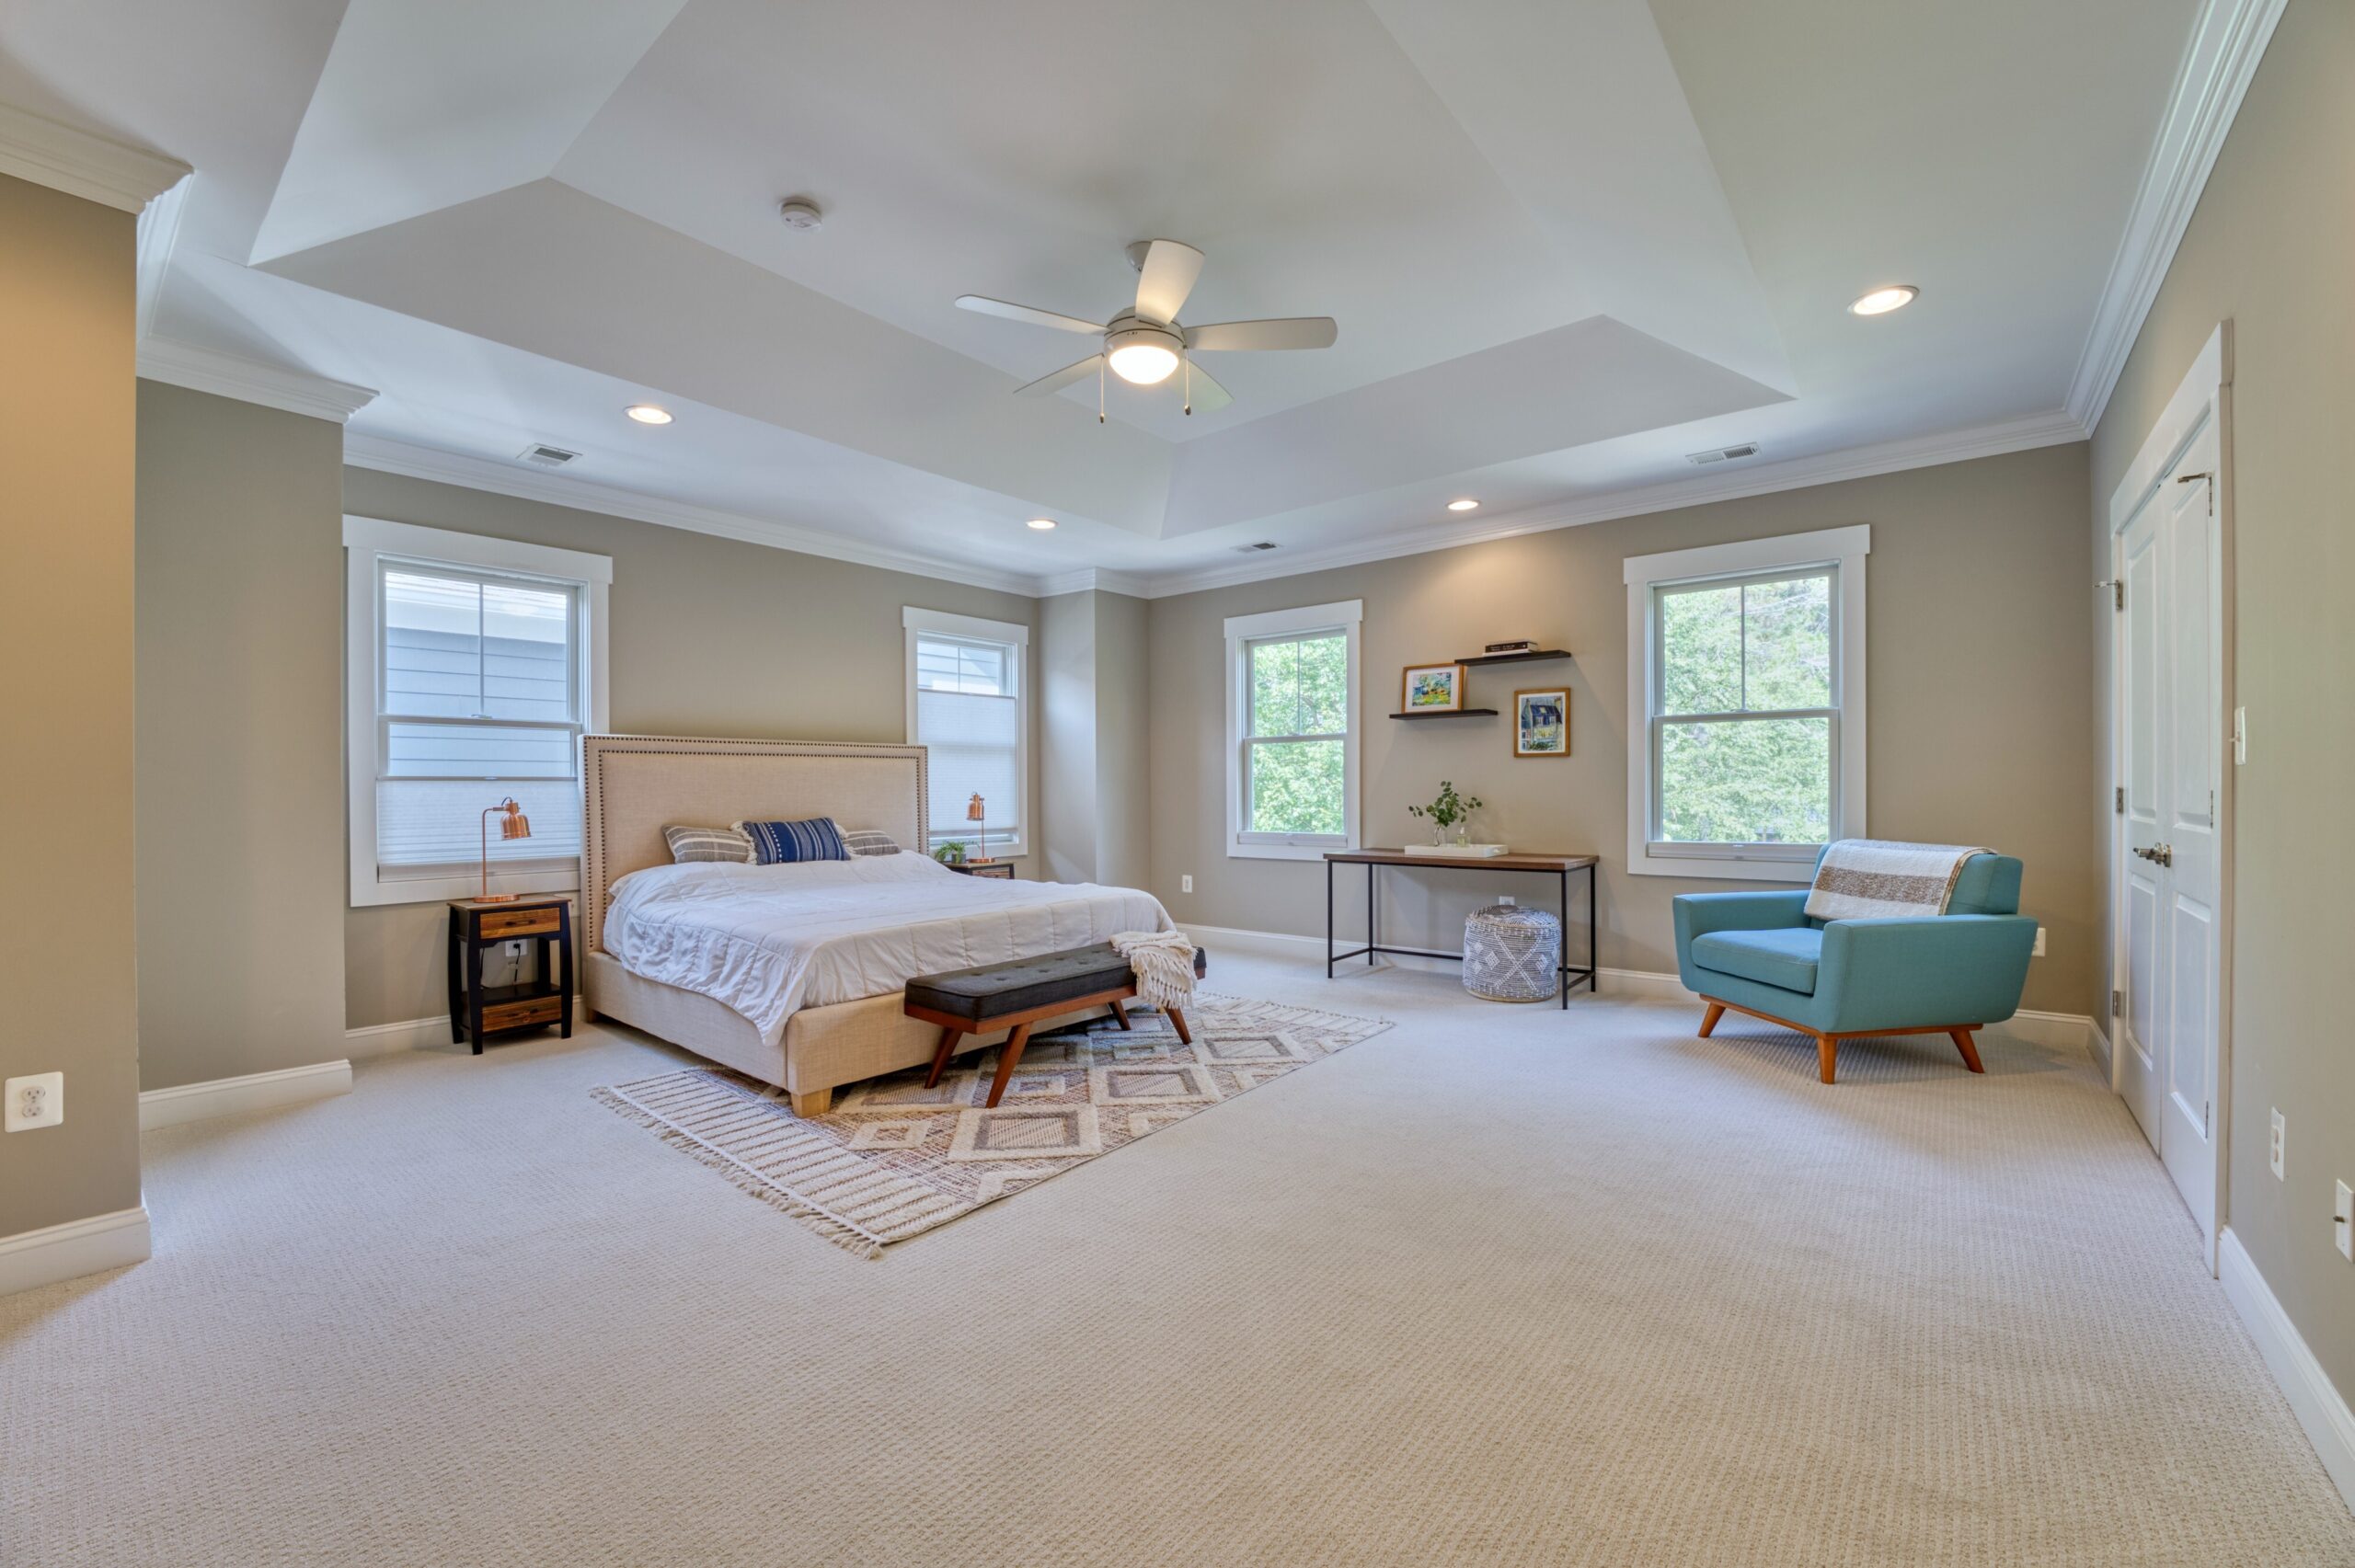 Professional interior photo of 505 N West St - showing the primary bedroom with deep tray ceiling, 4 windows and closet doors